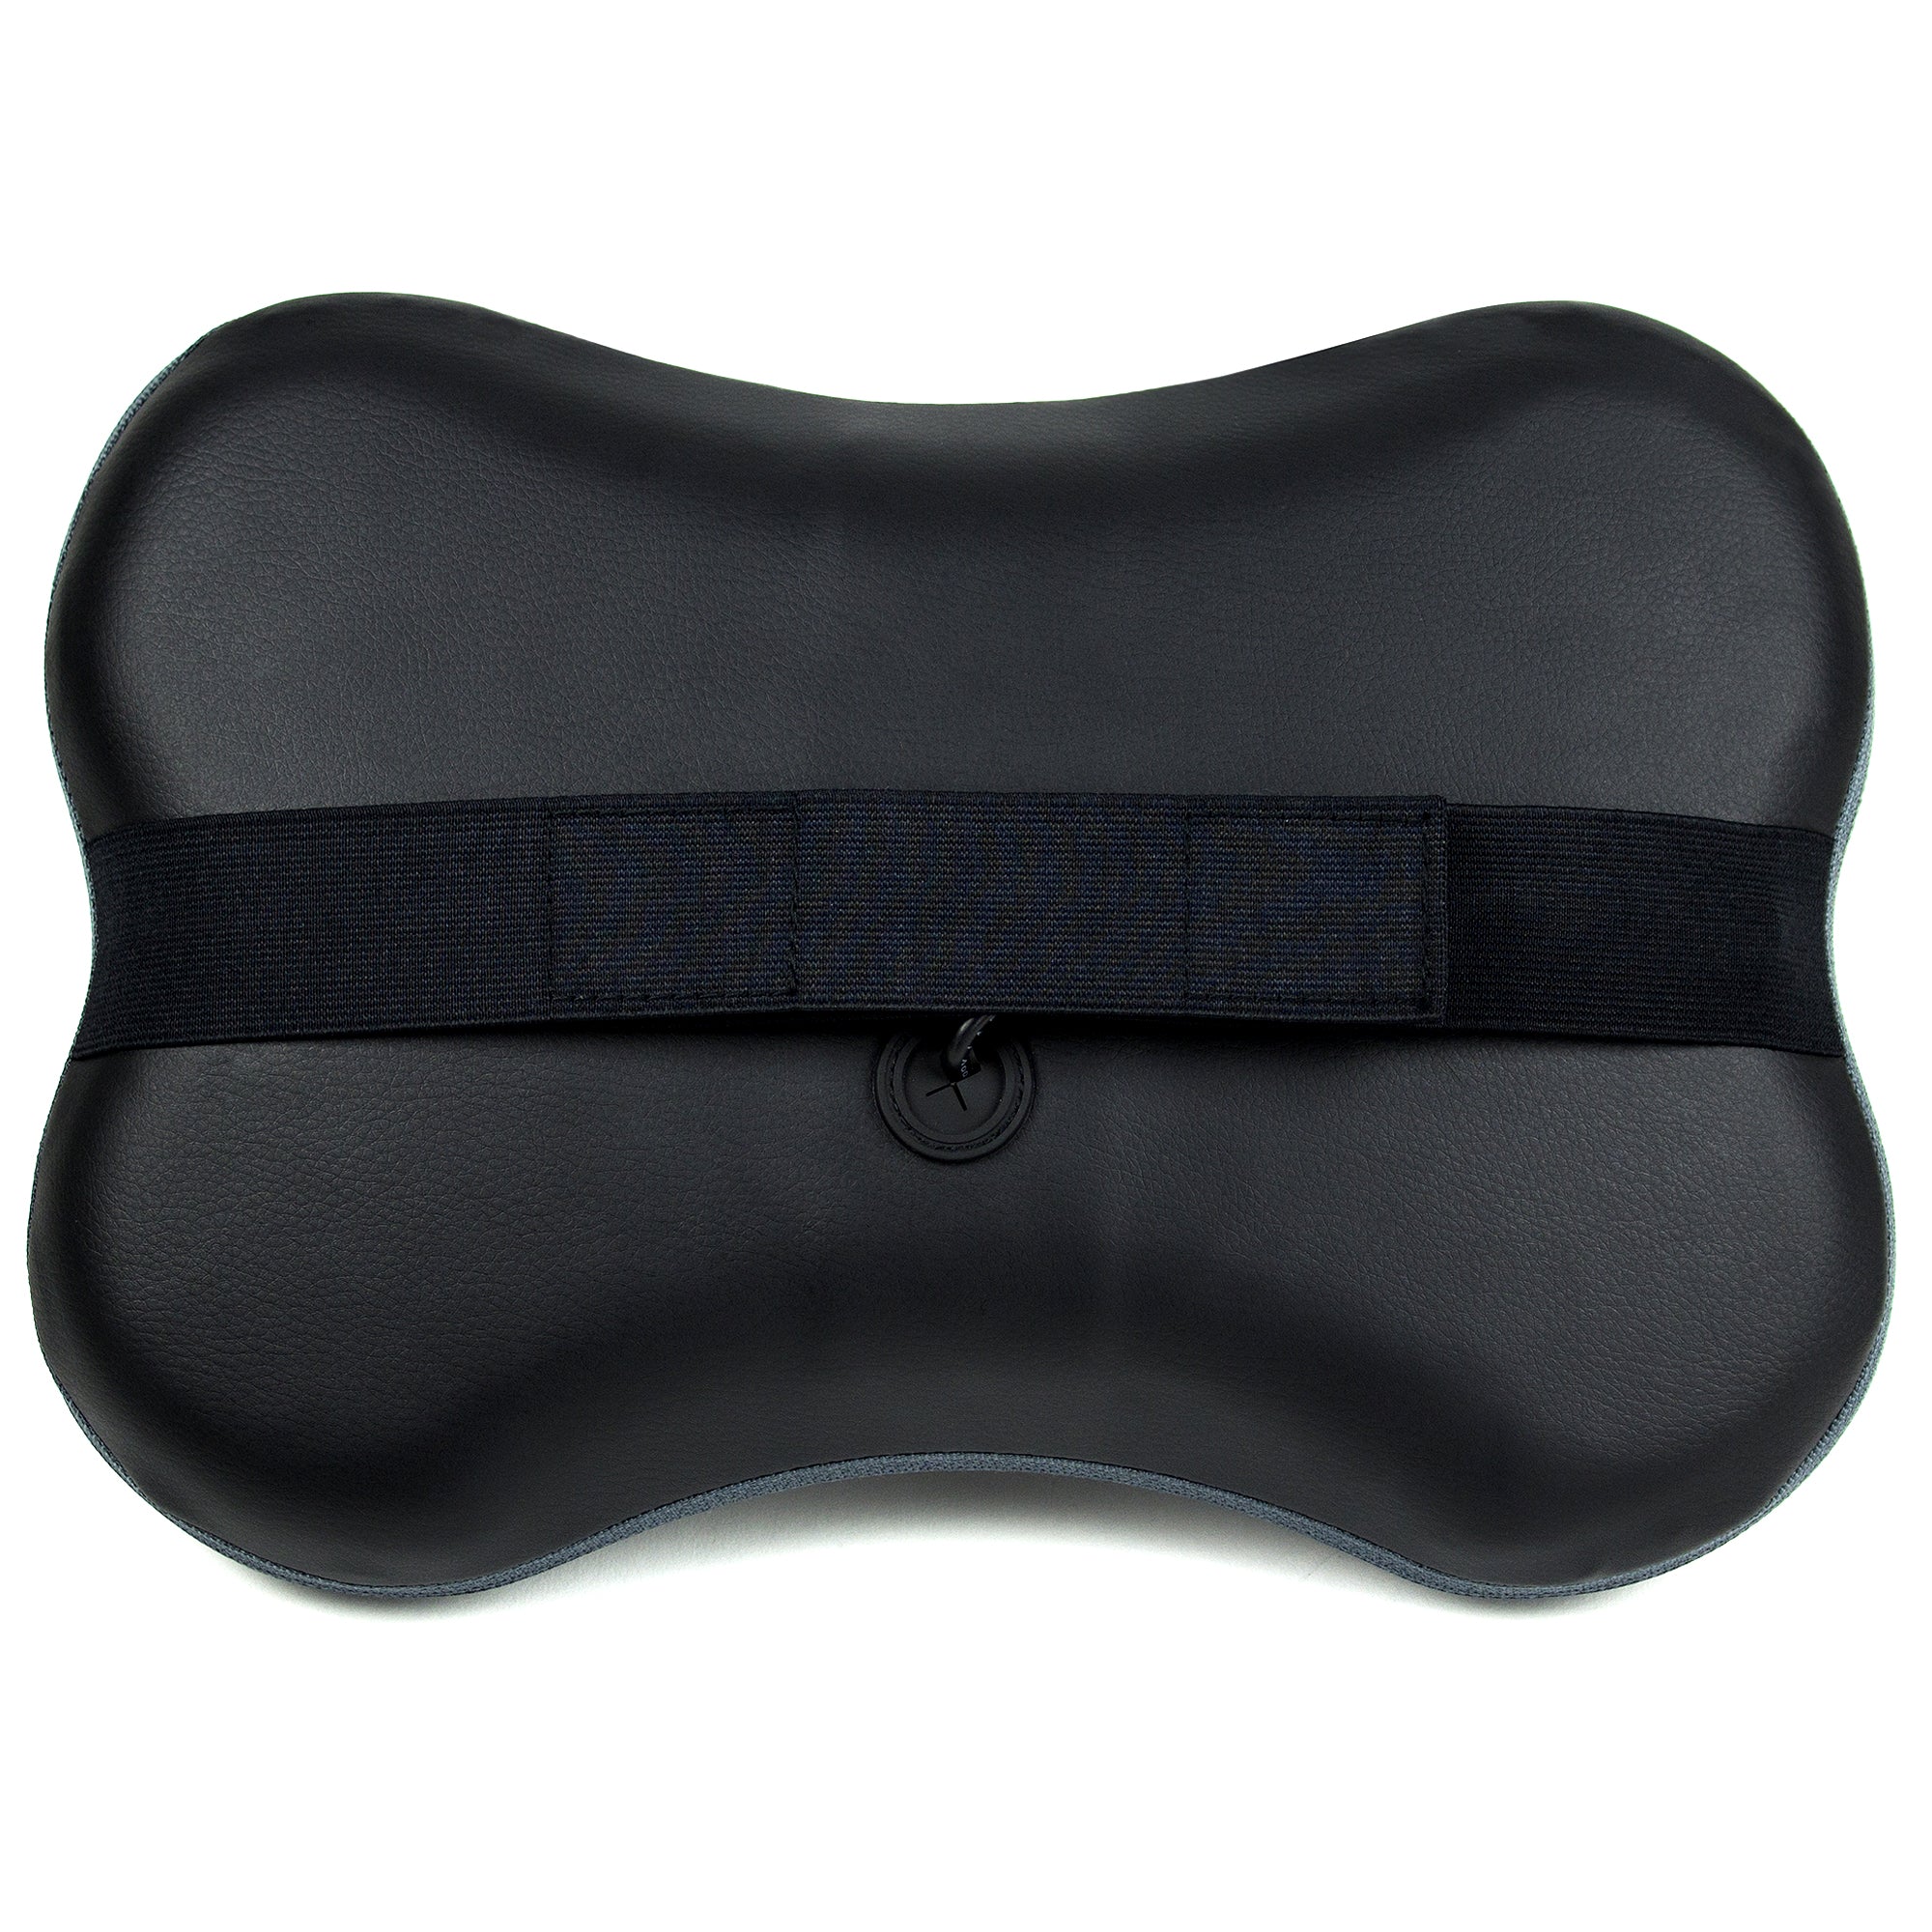 Zyllion ZMA-14-BKAVE Shiatsu Neck & Back Massager Cushion With Soothing  Heat for sale online